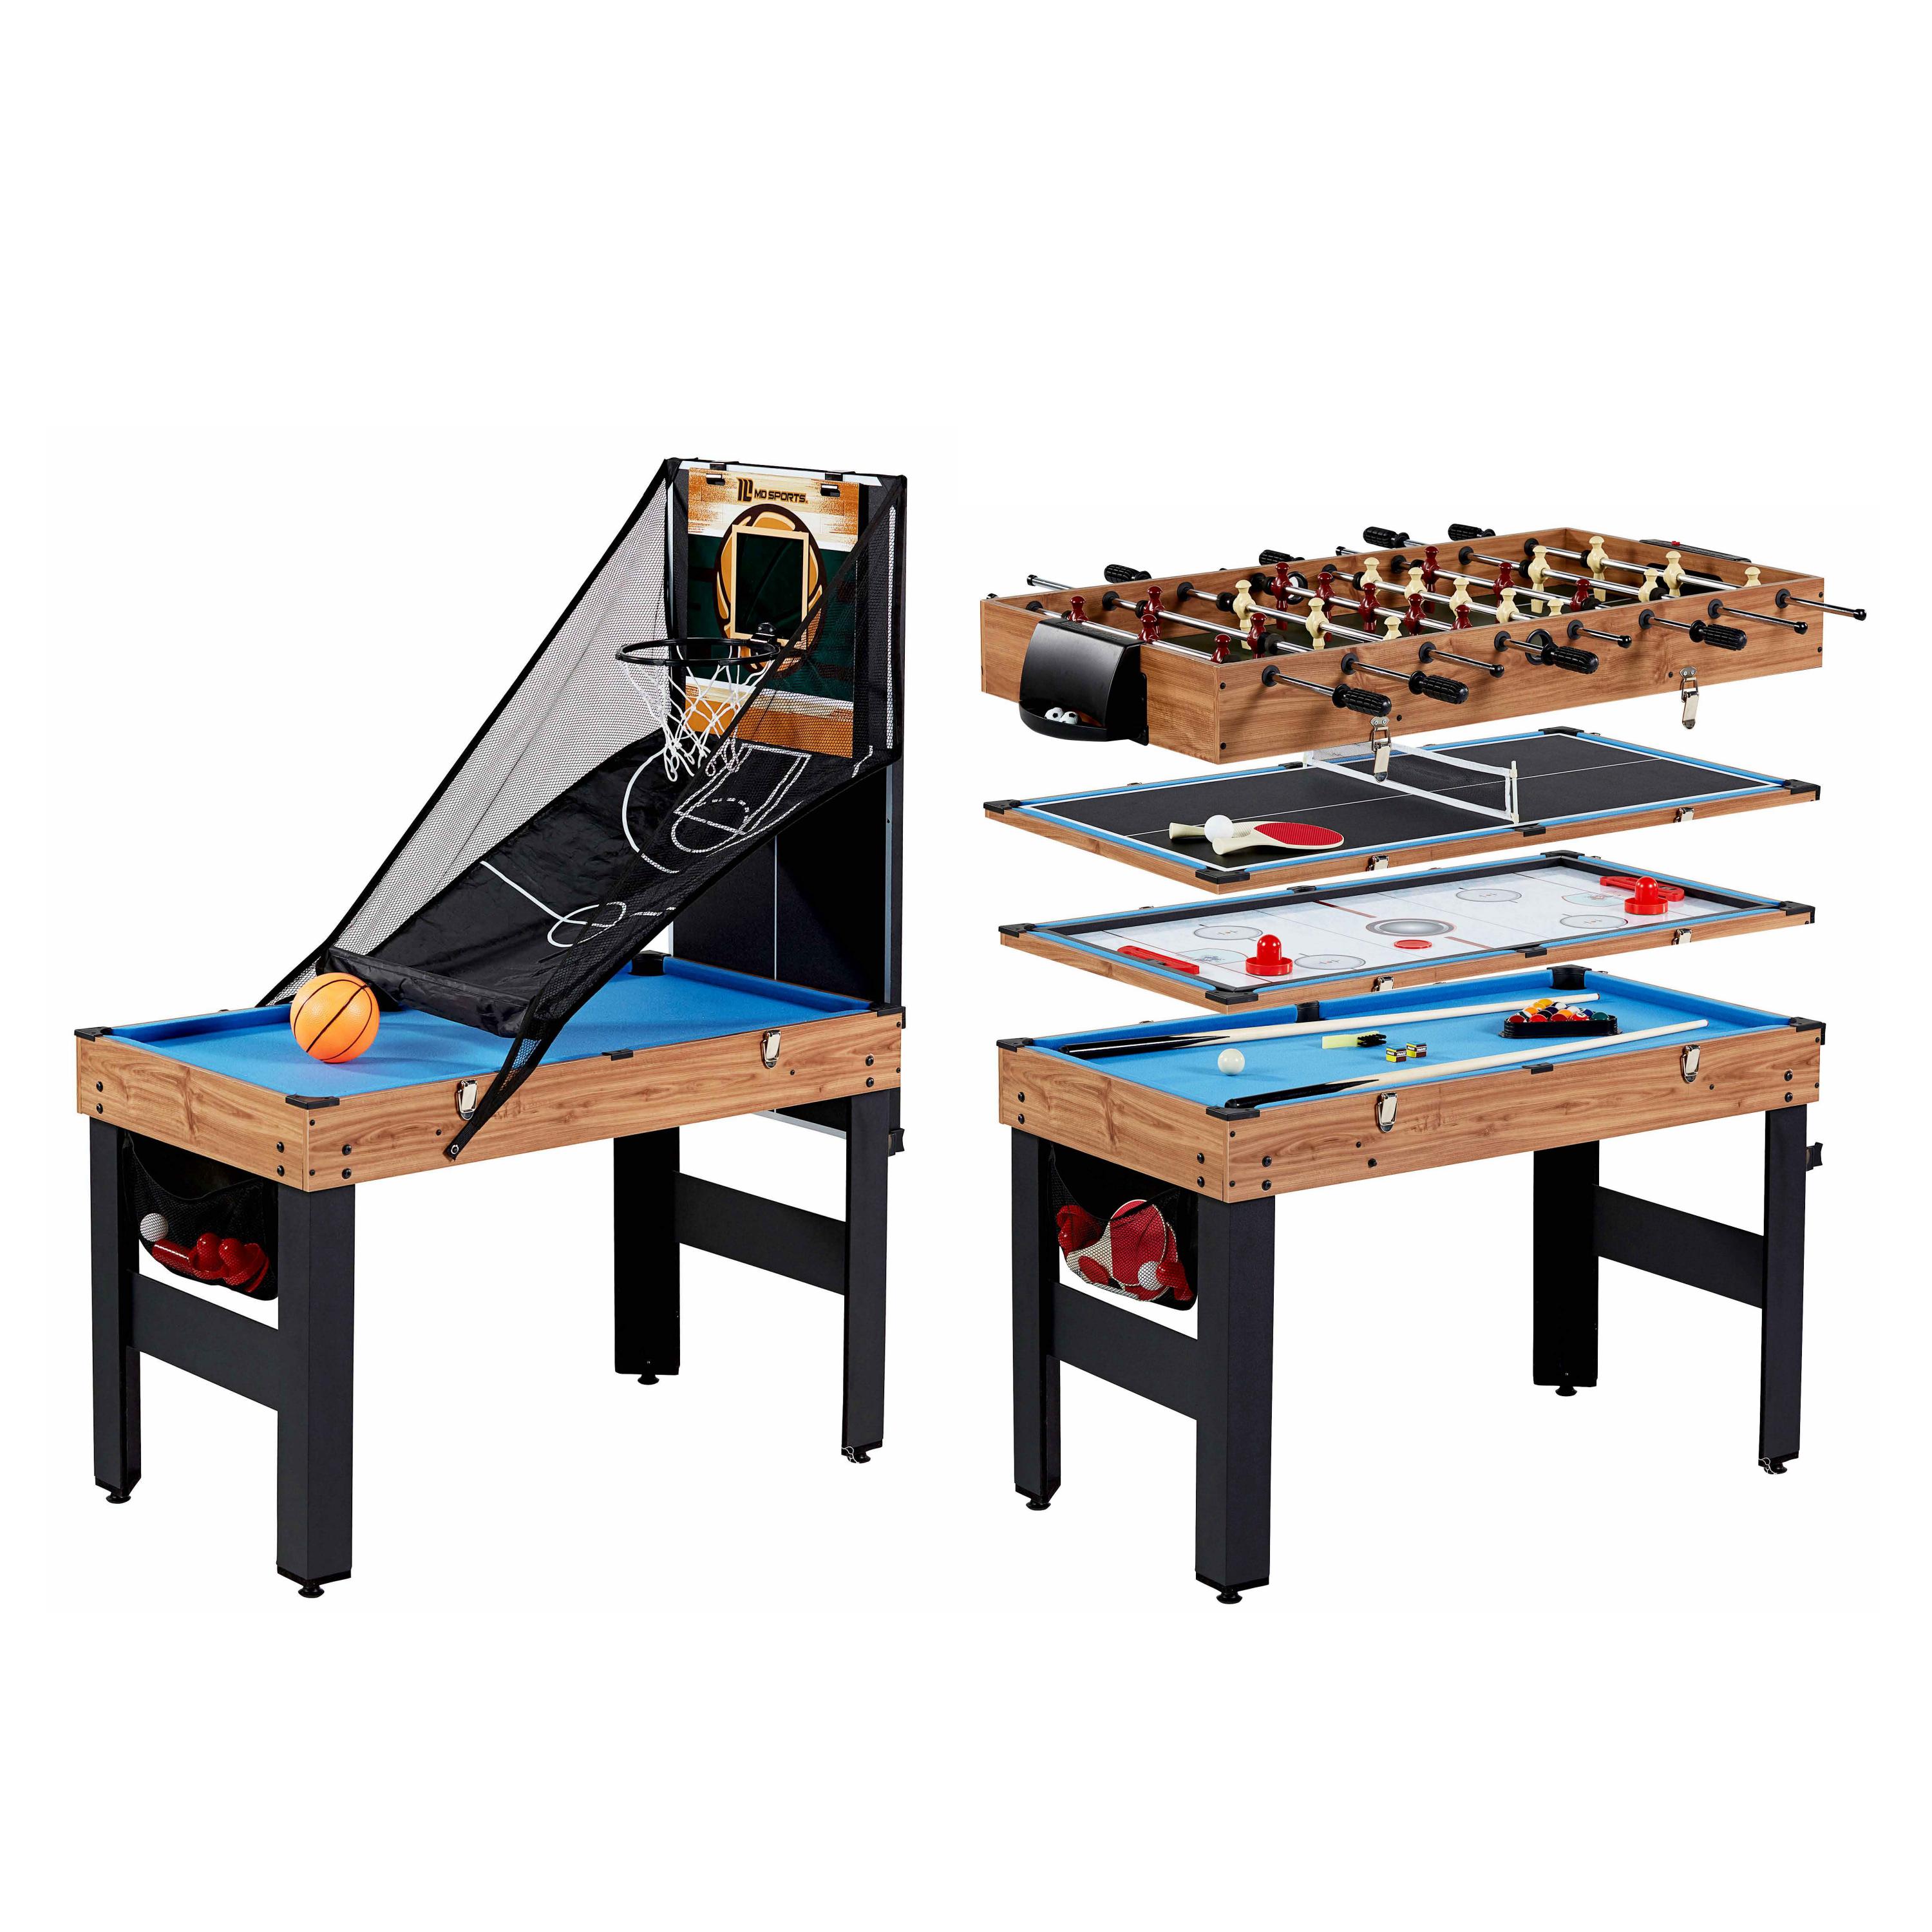 MD Sports Pool, Hockey, Foosball, Table Tennis, Basketball Combo Game Table - image 1 of 10